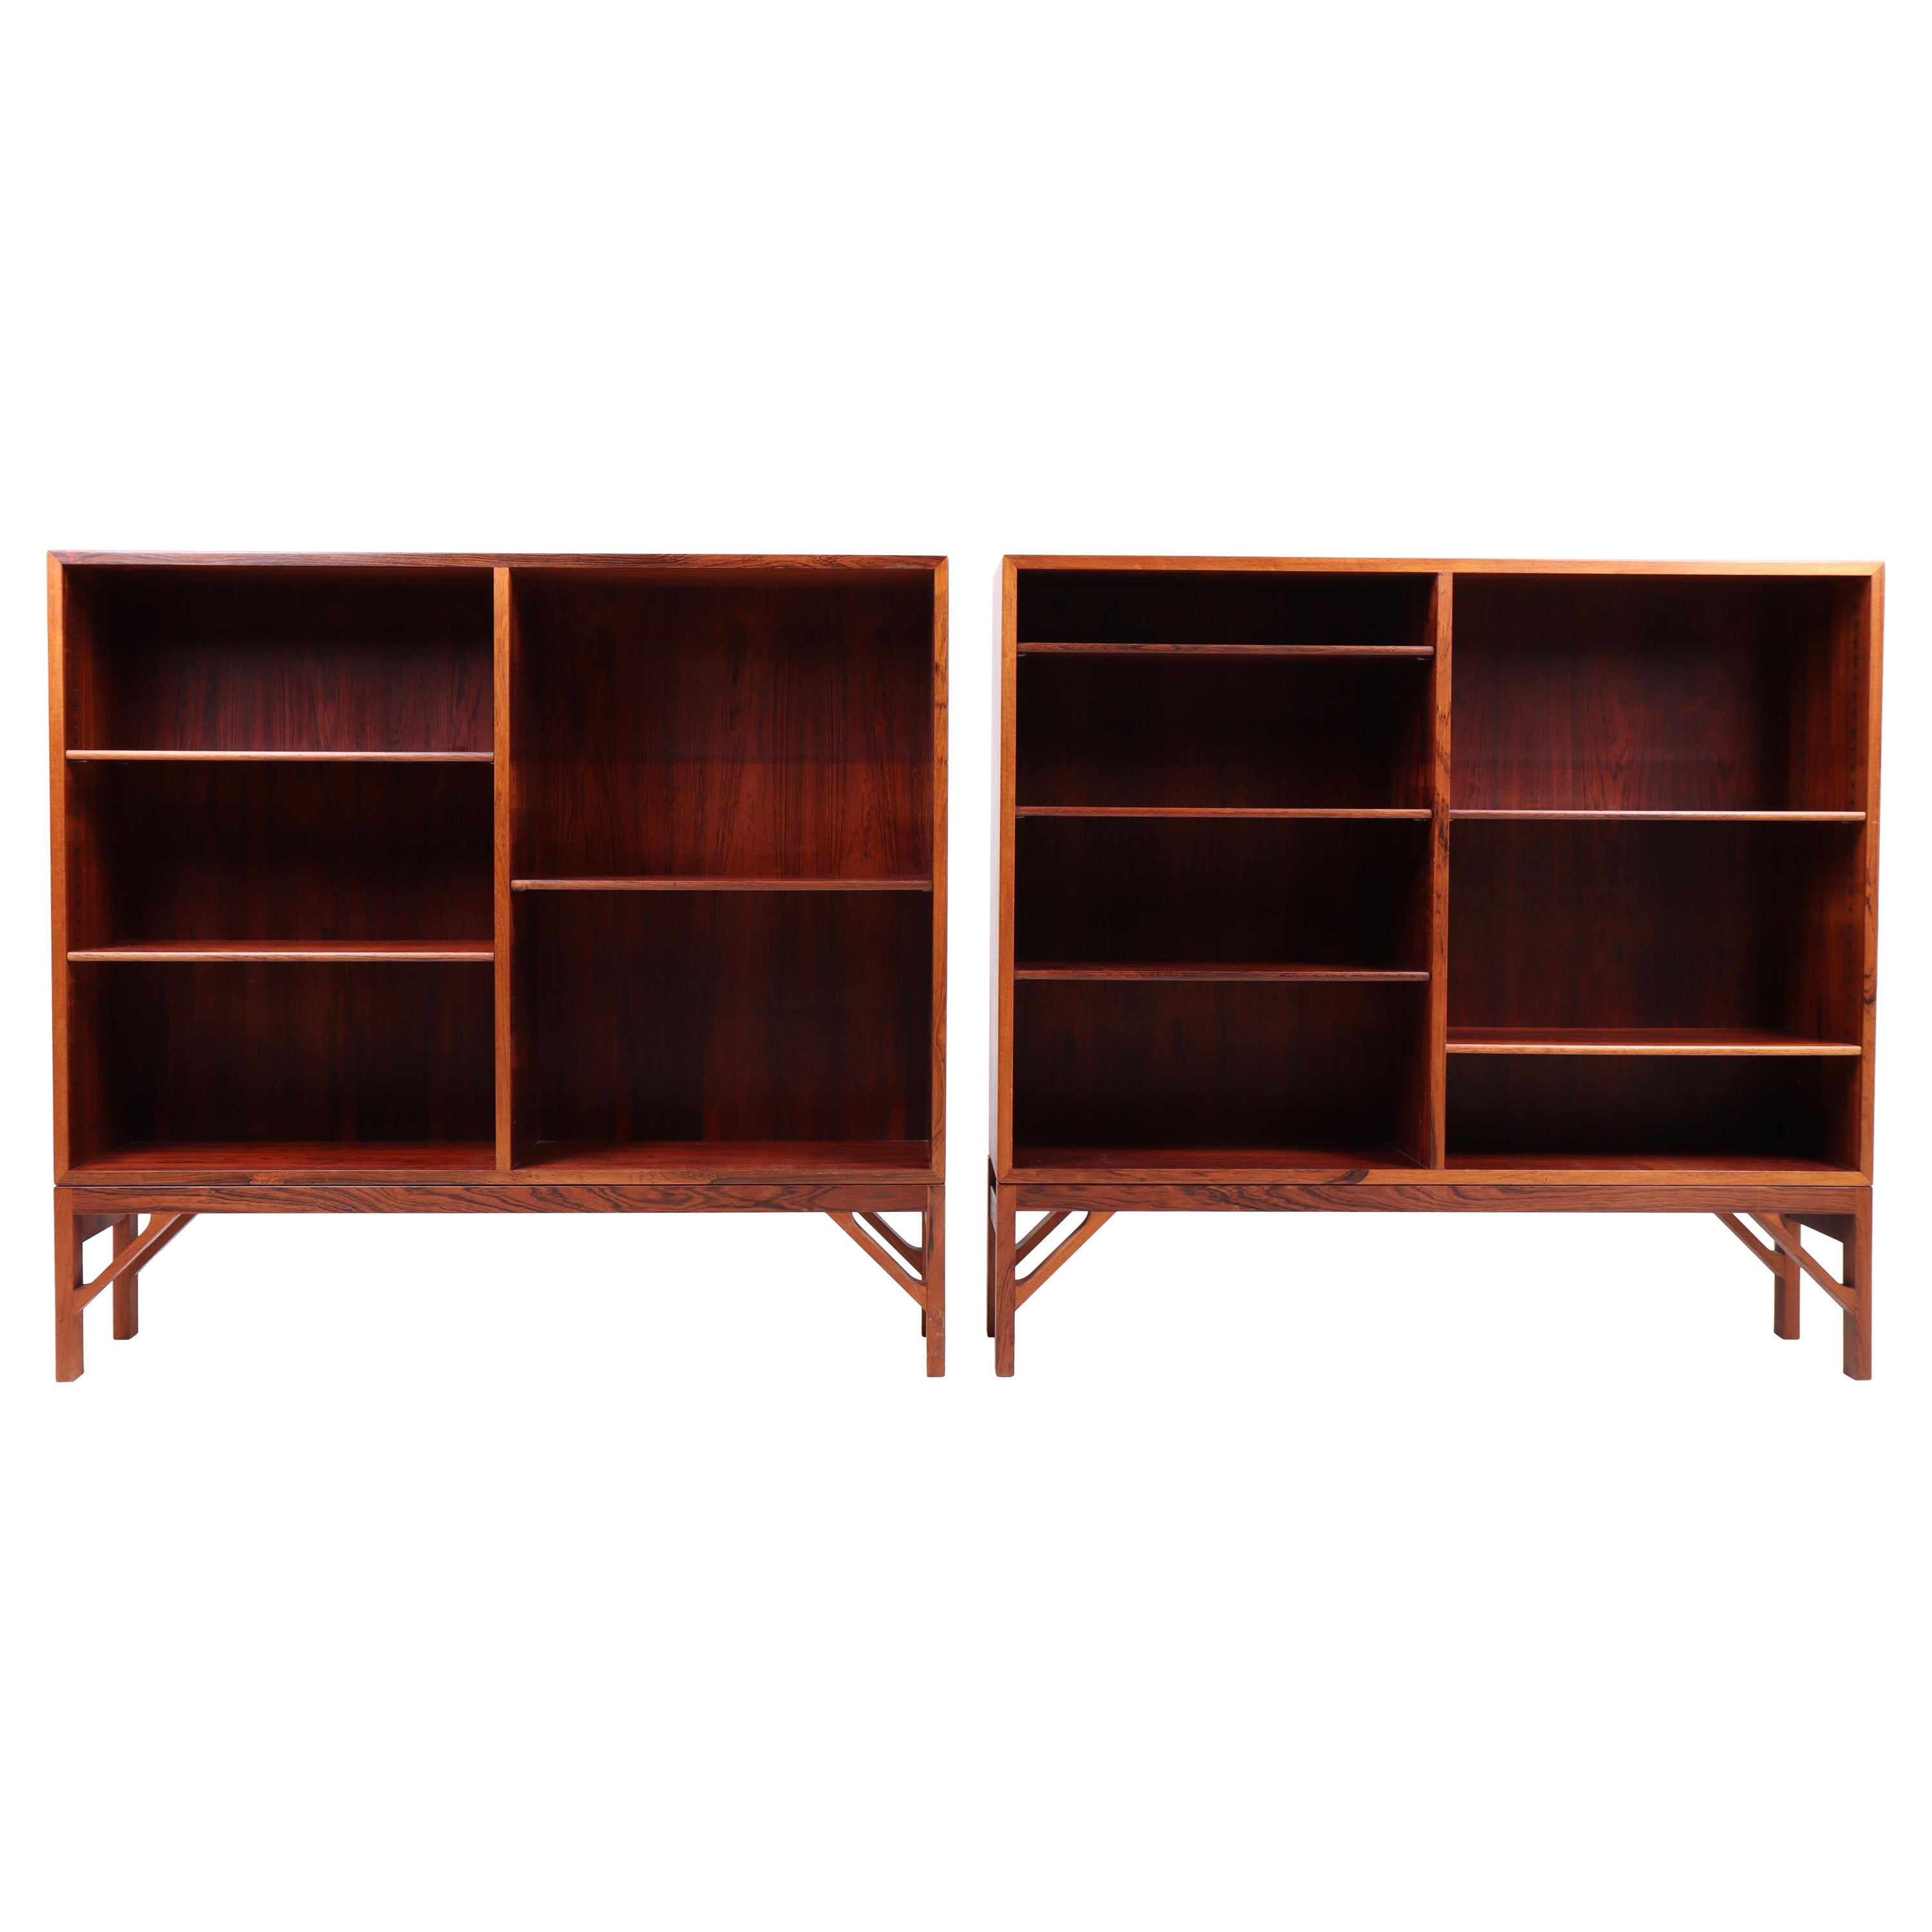 Pair of China Bookcases in Rosewood by Børge Mogensen, Made in Denmark, 1960s For Sale